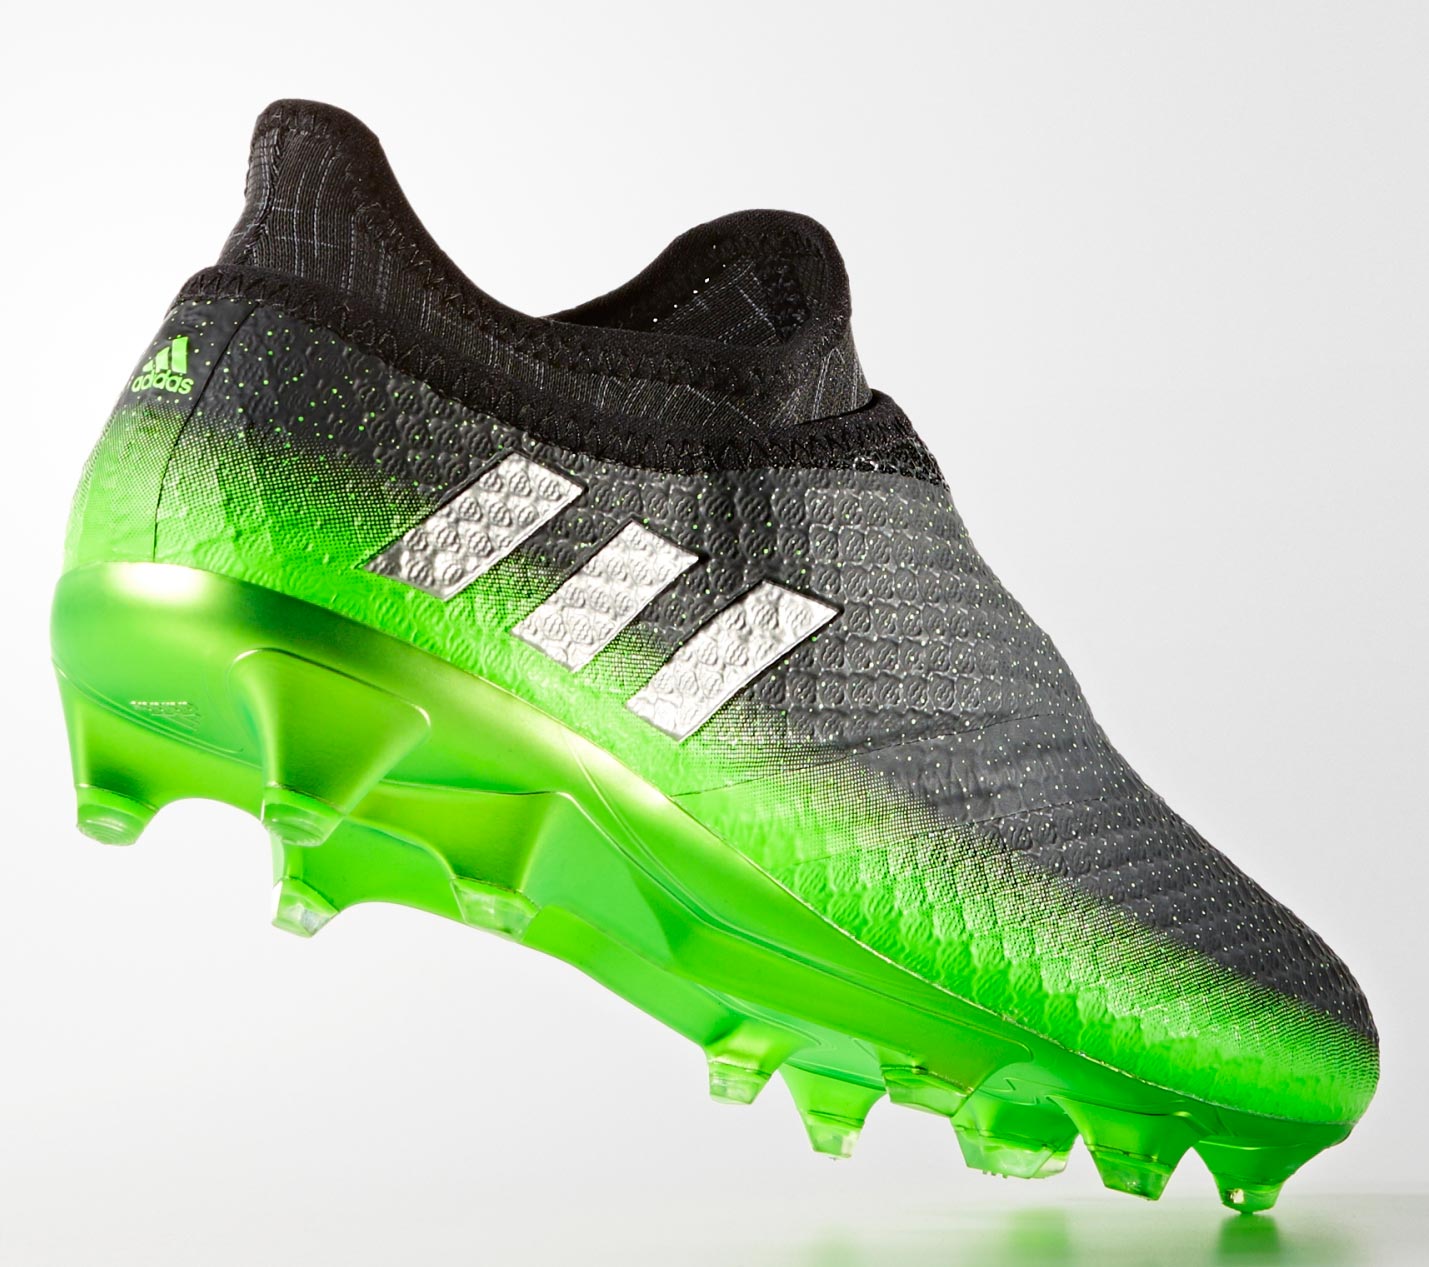 cent mixer Cater Adidas Messi 16+ PureAgility Space Dust Boots Released - Footy Headlines